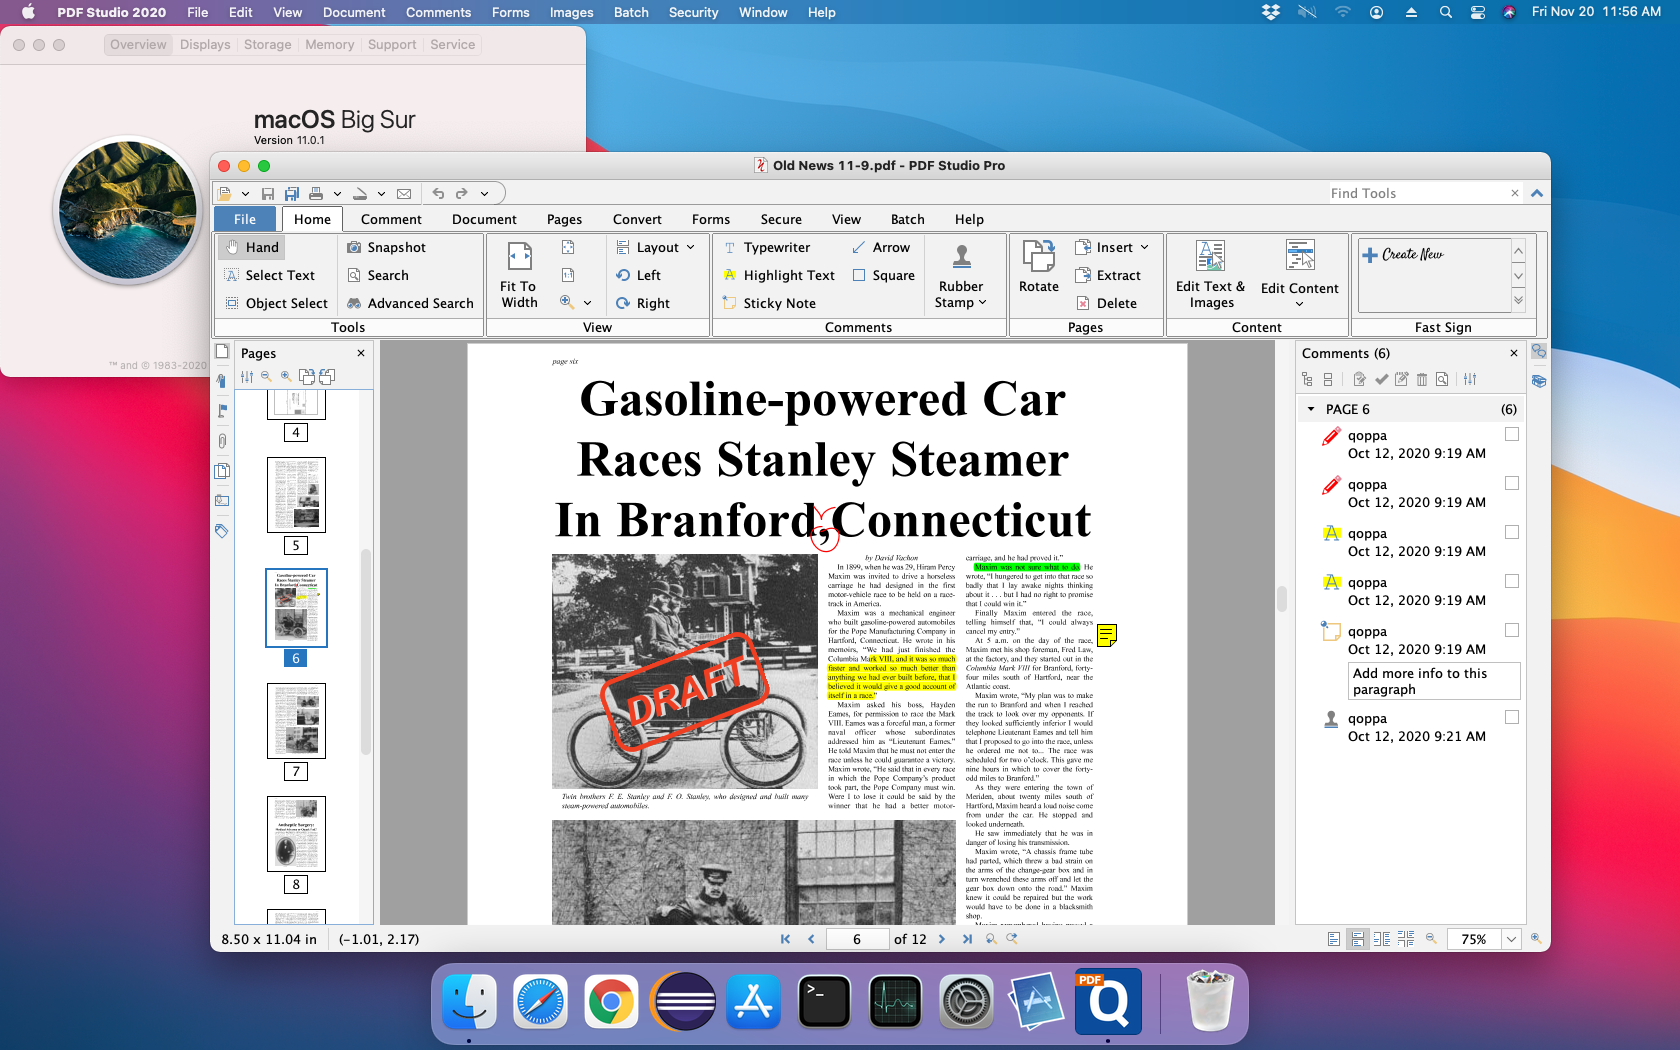 pdf maker and editor for mac